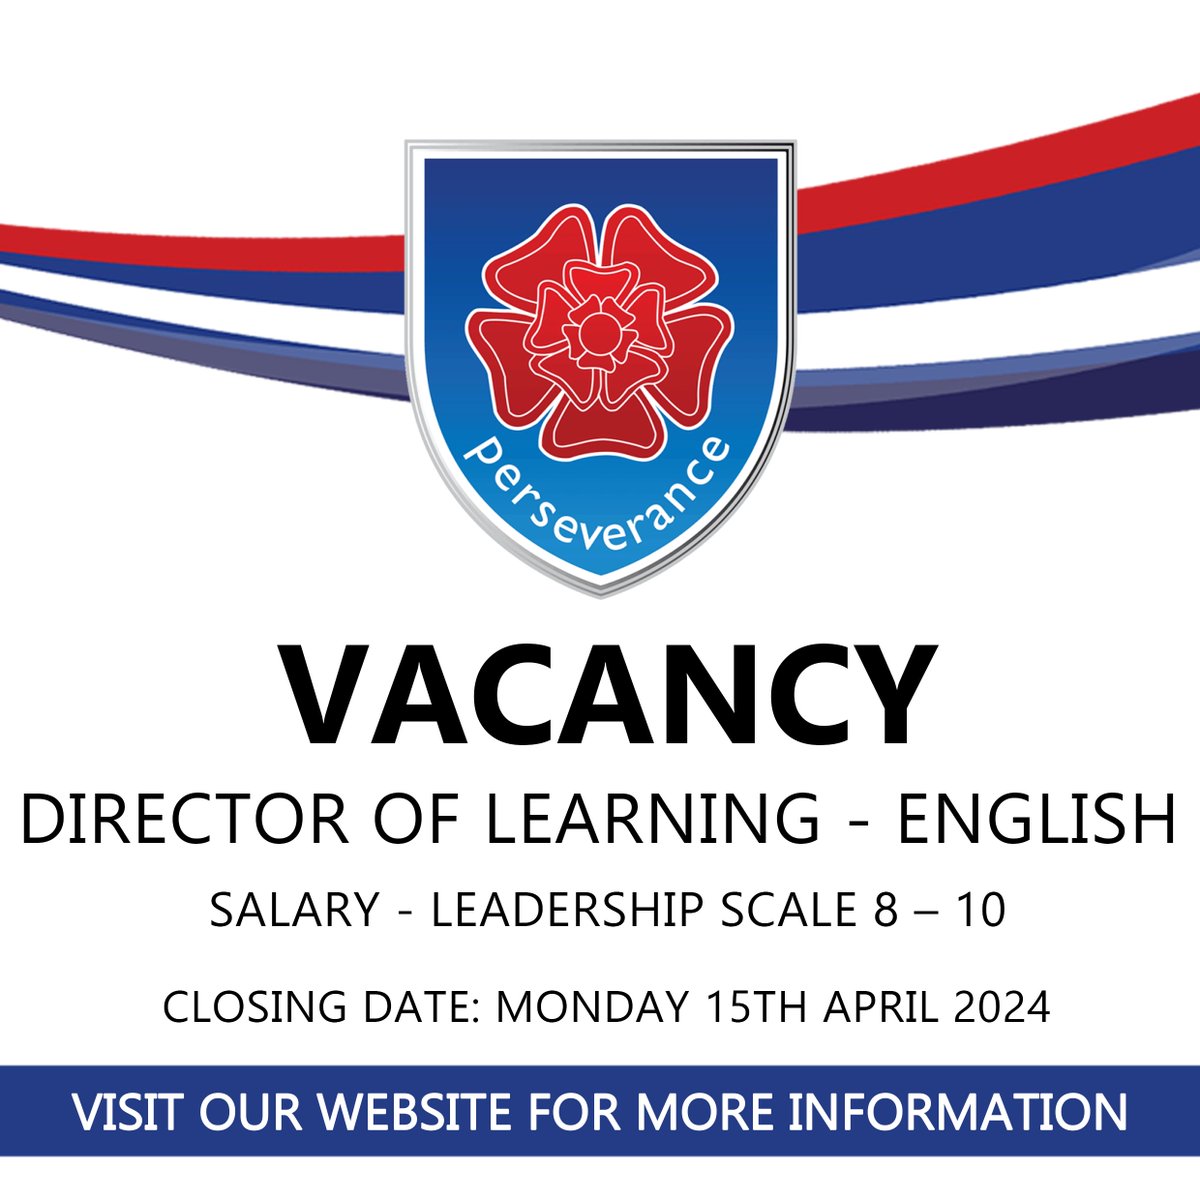 We currently have a vacancy for a Director of Learning - English More information is available on our website: penkethhigh.org/vacancies/